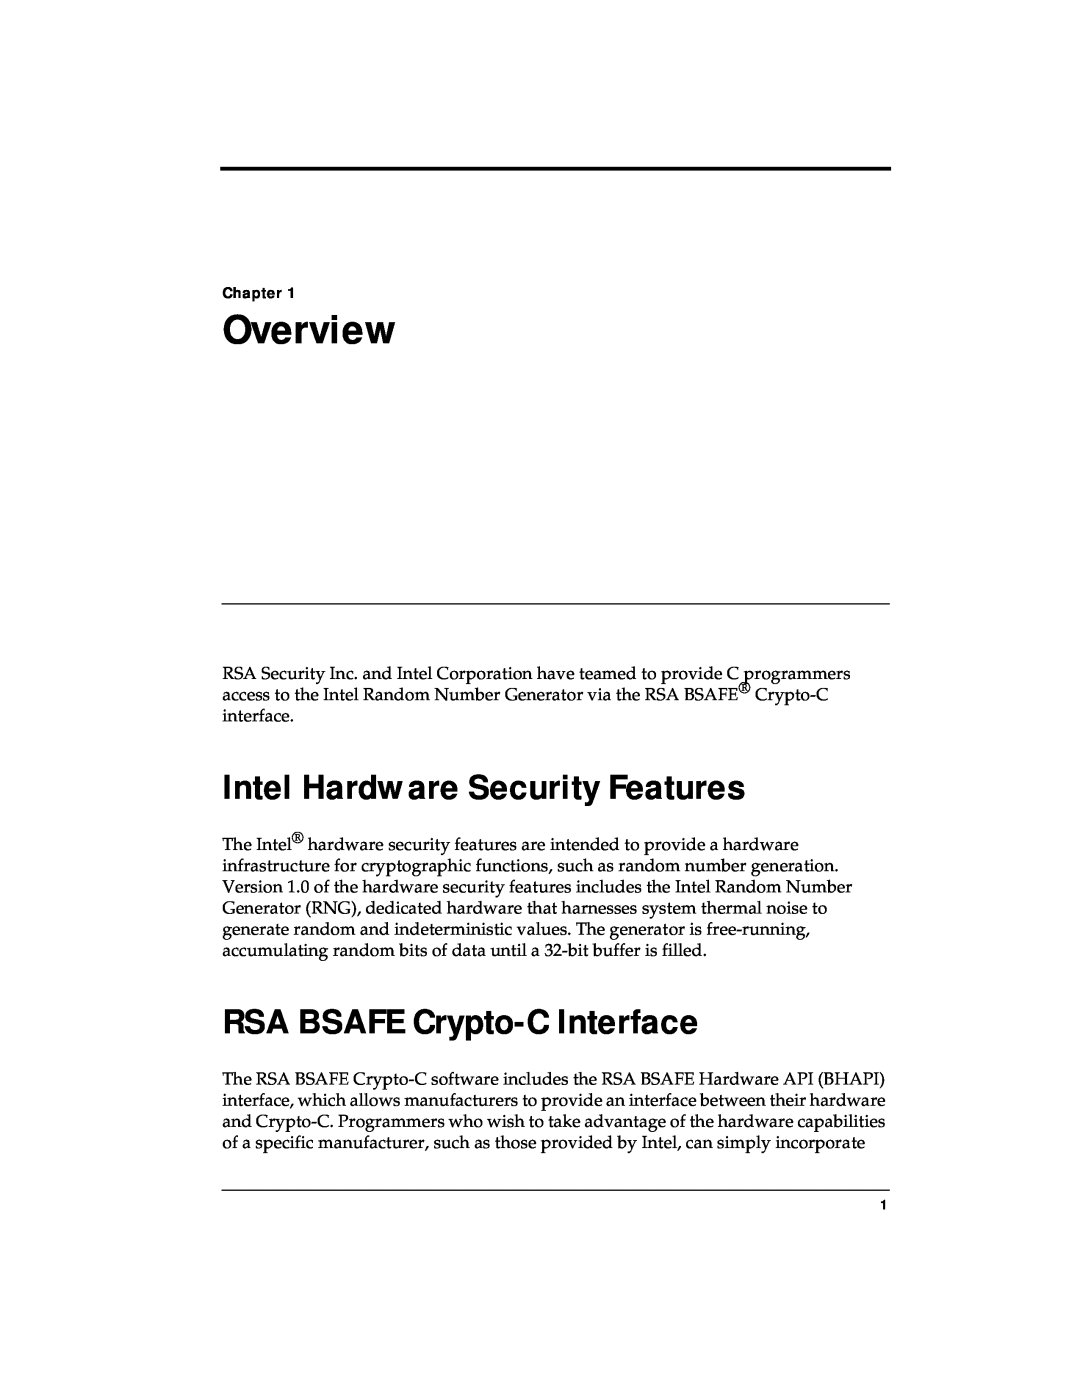 RSA Security 4.3 manual Overview, Intel Hardware Security Features, RSA BSAFE Crypto-CInterface, Chapter 